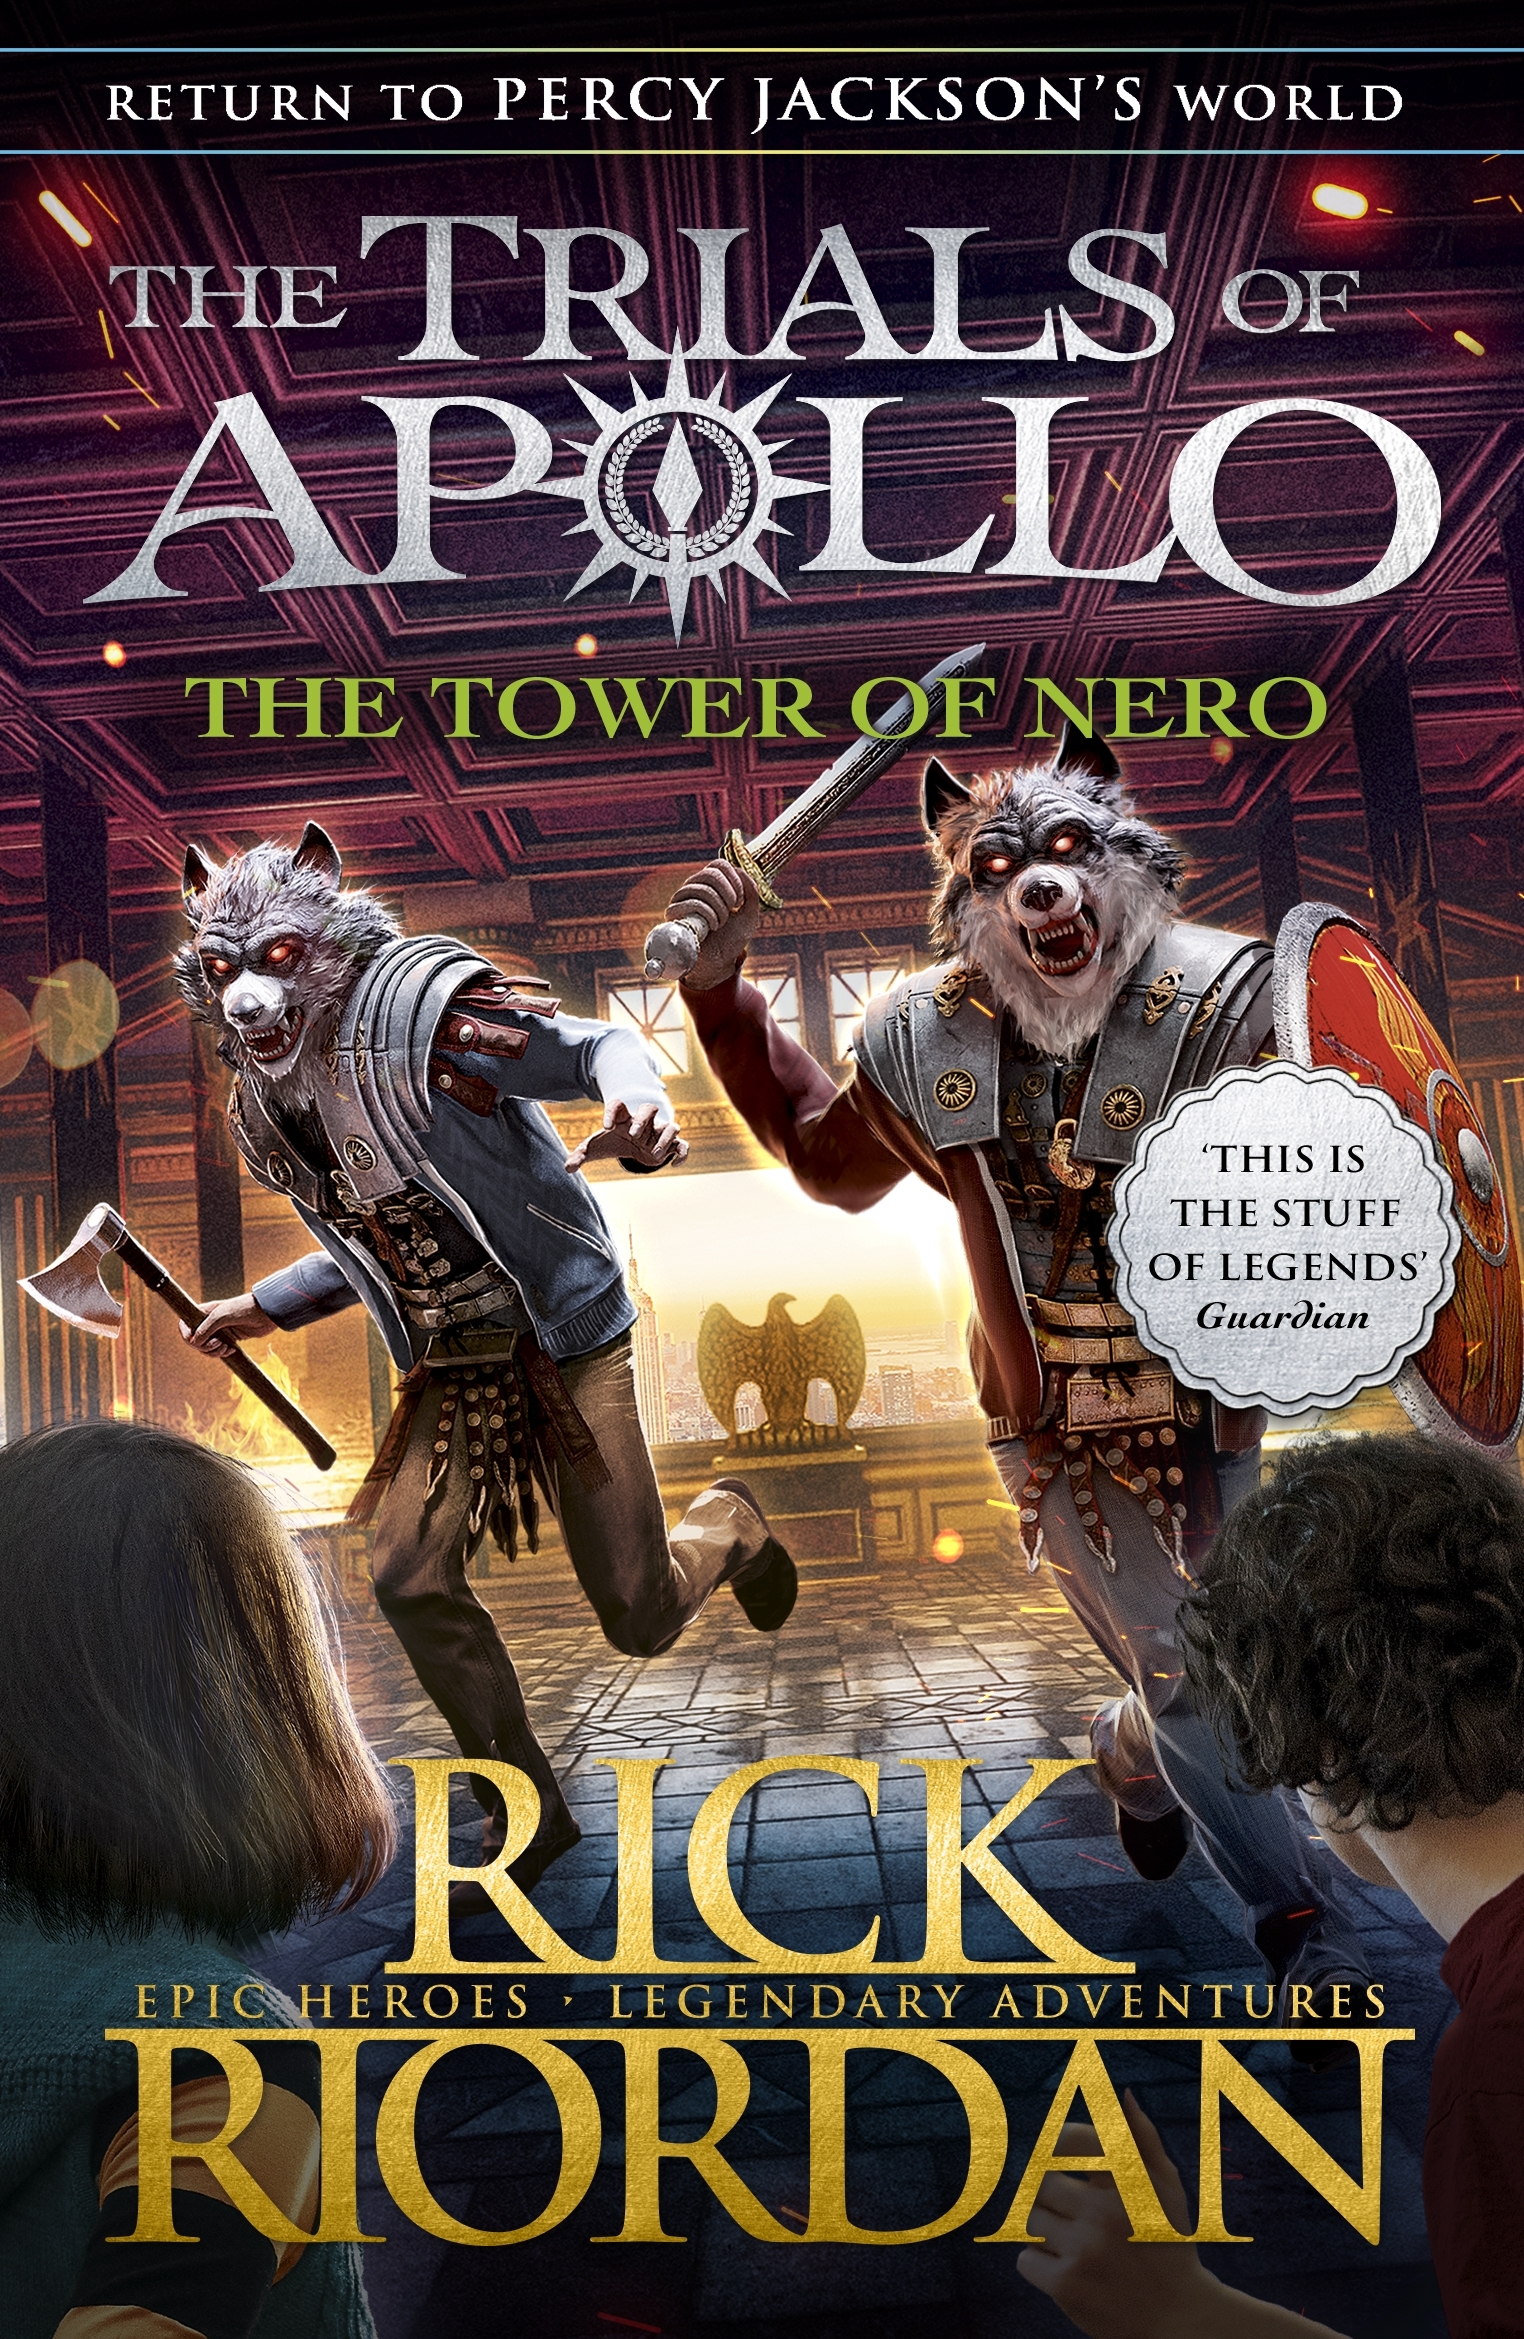 The trials of apolo :  the tower of nero